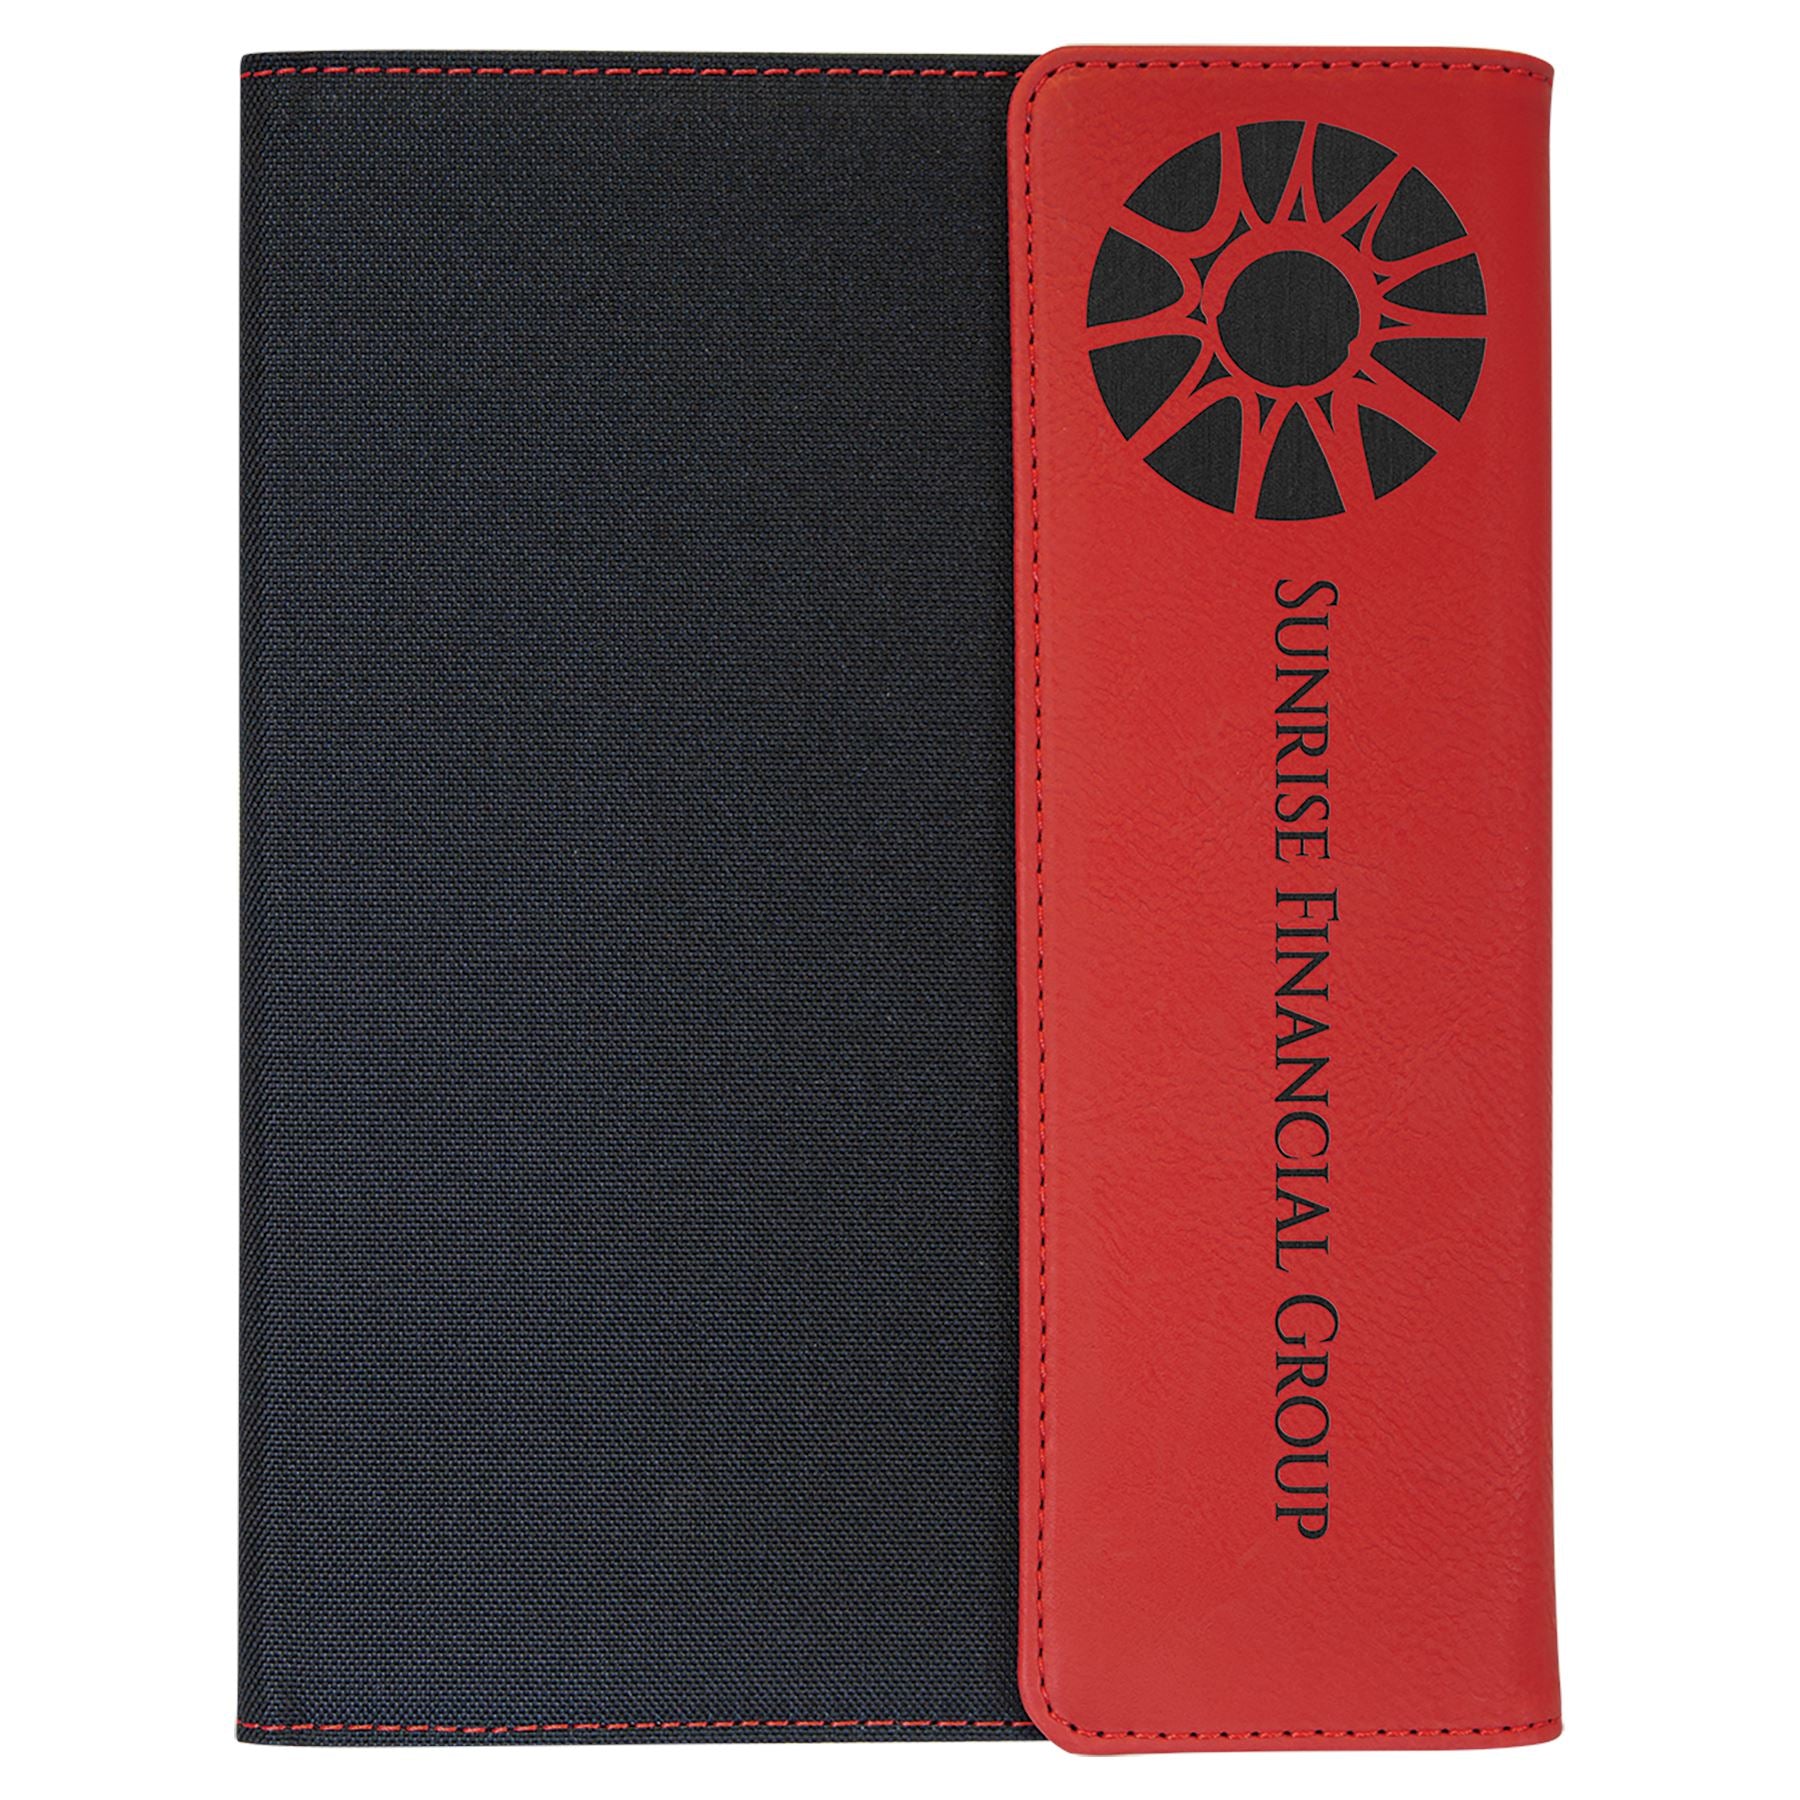 Canvas & Laserable Leatherette Portfolio/Padfolio w/Notepad, 7" x 9", Laser Engraved Portfolio Craftworks NW Black Canvas w/Red/Black Interior Only Small